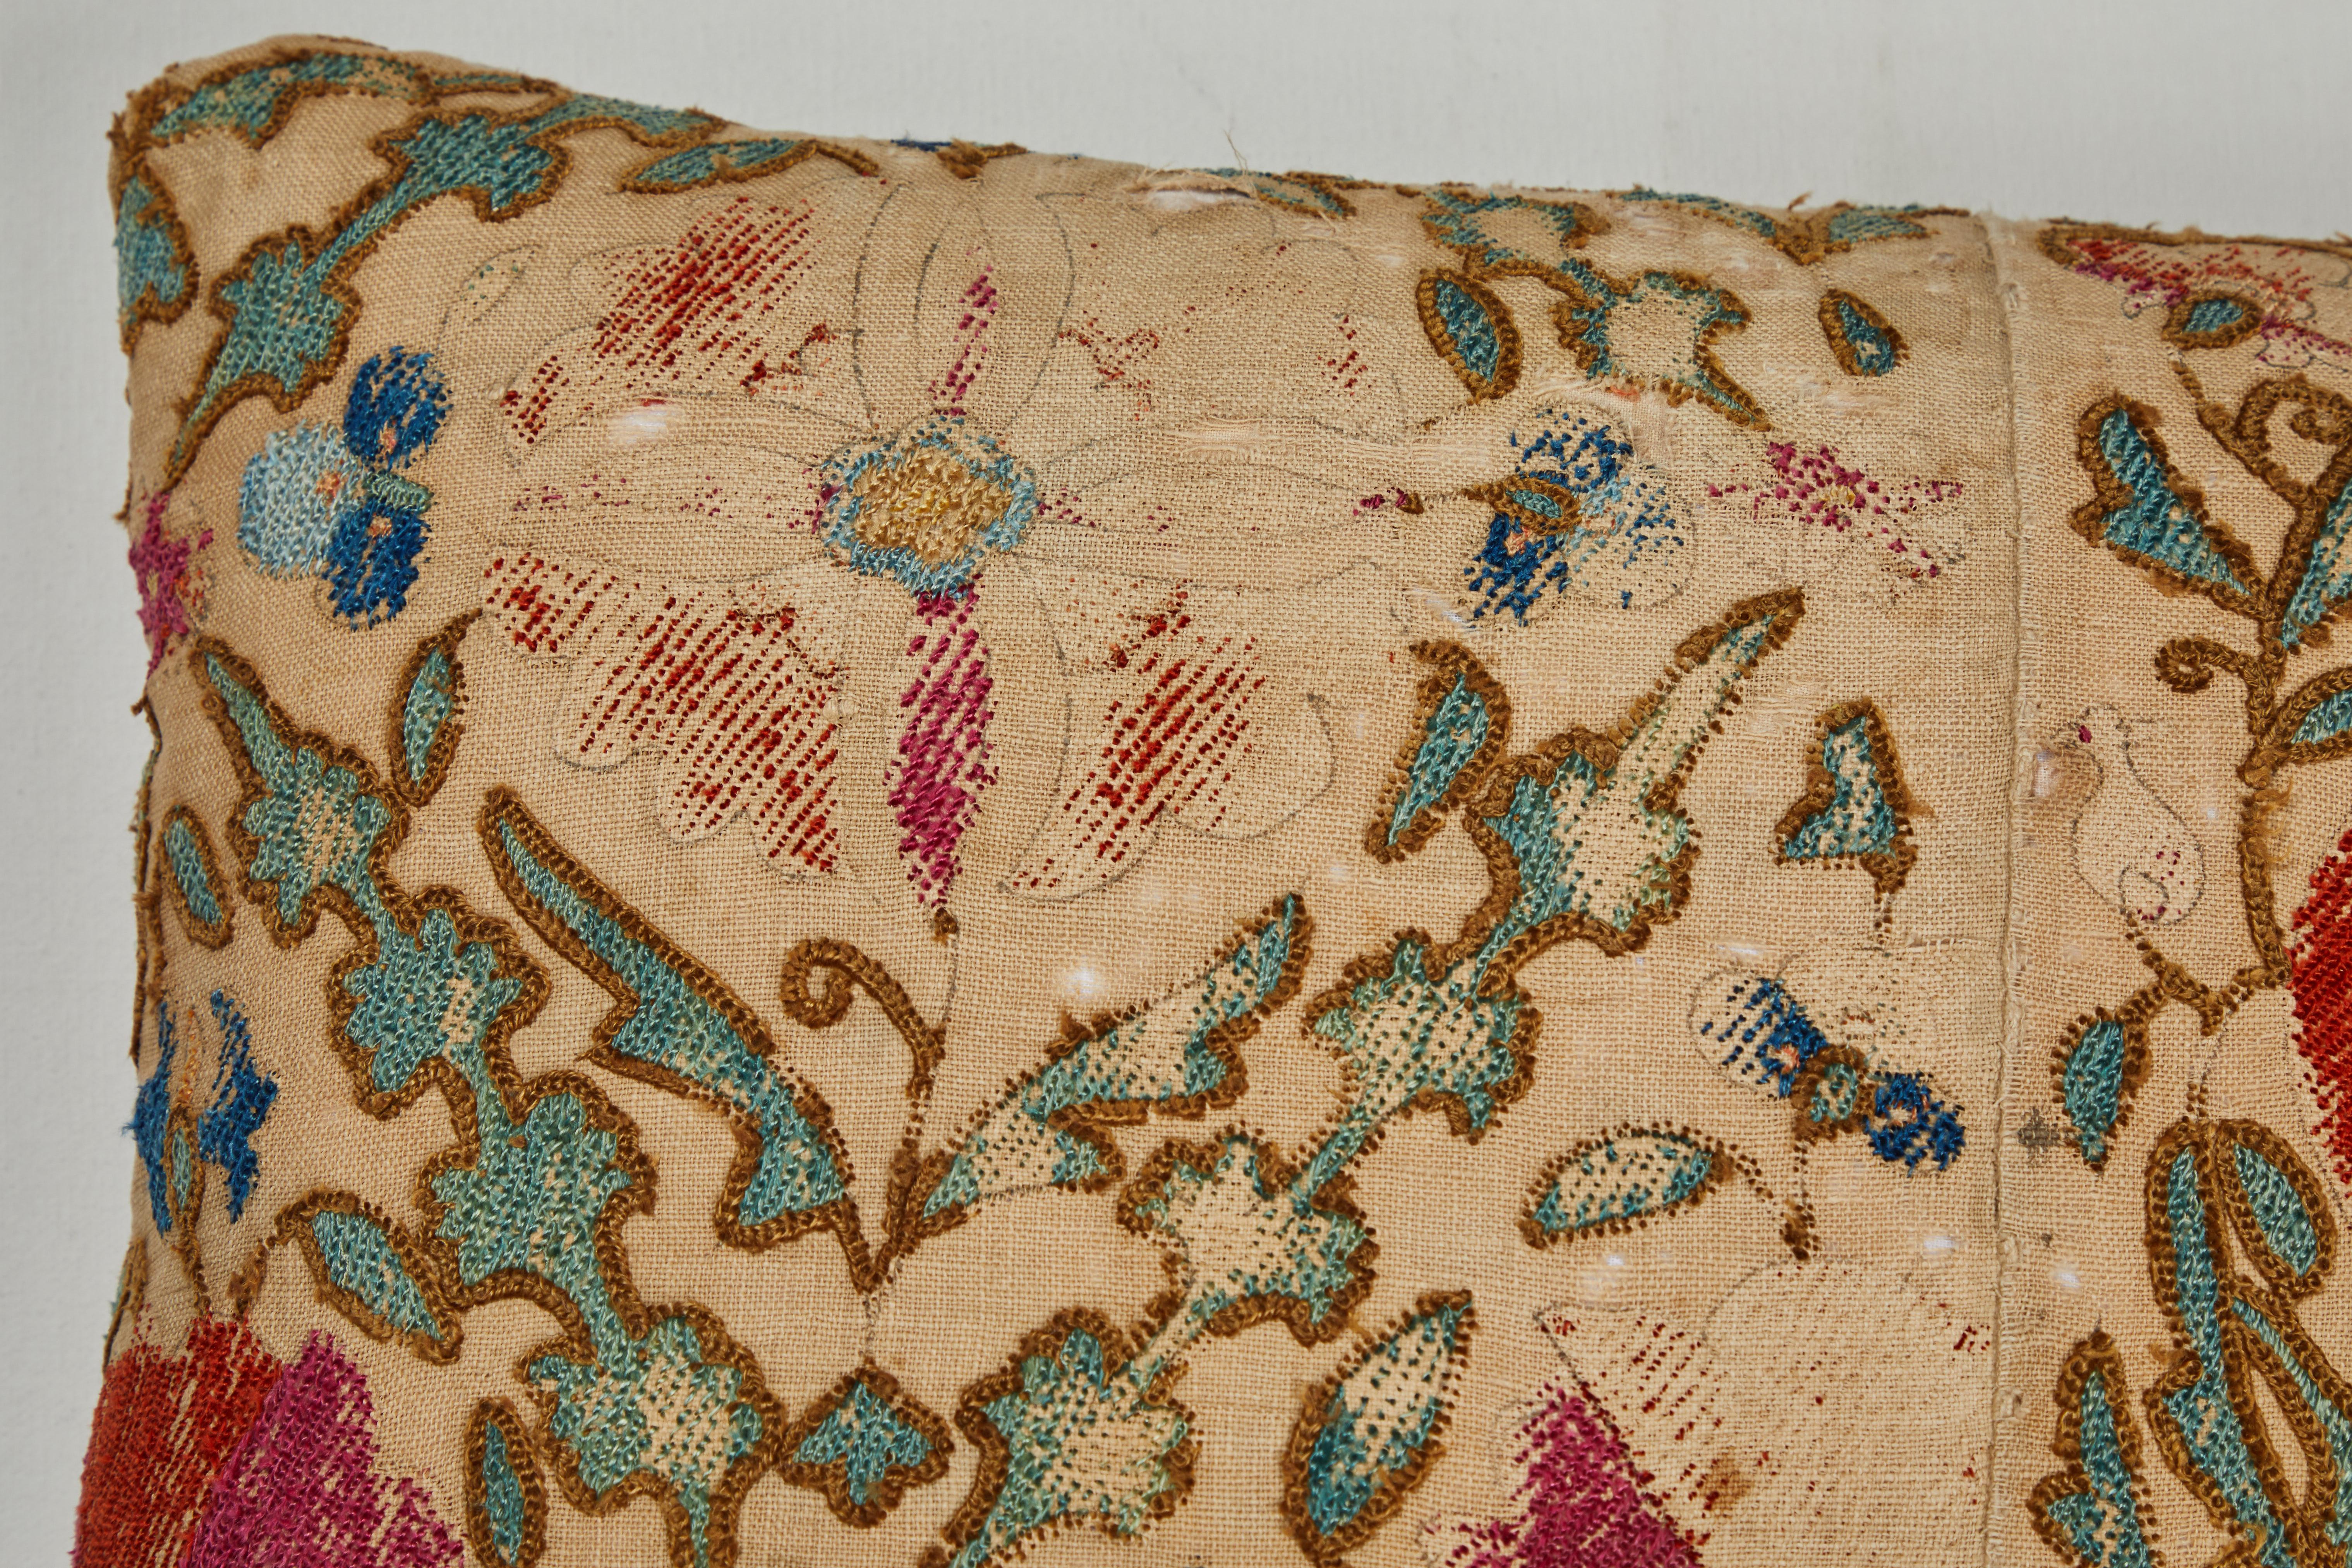 19th century Uzbek Suzani textile fragment. Silk couching and chain stitch on hand woven linen. Lovingly worn. Natural linen back, invisible zipper closure, feather and down fill.